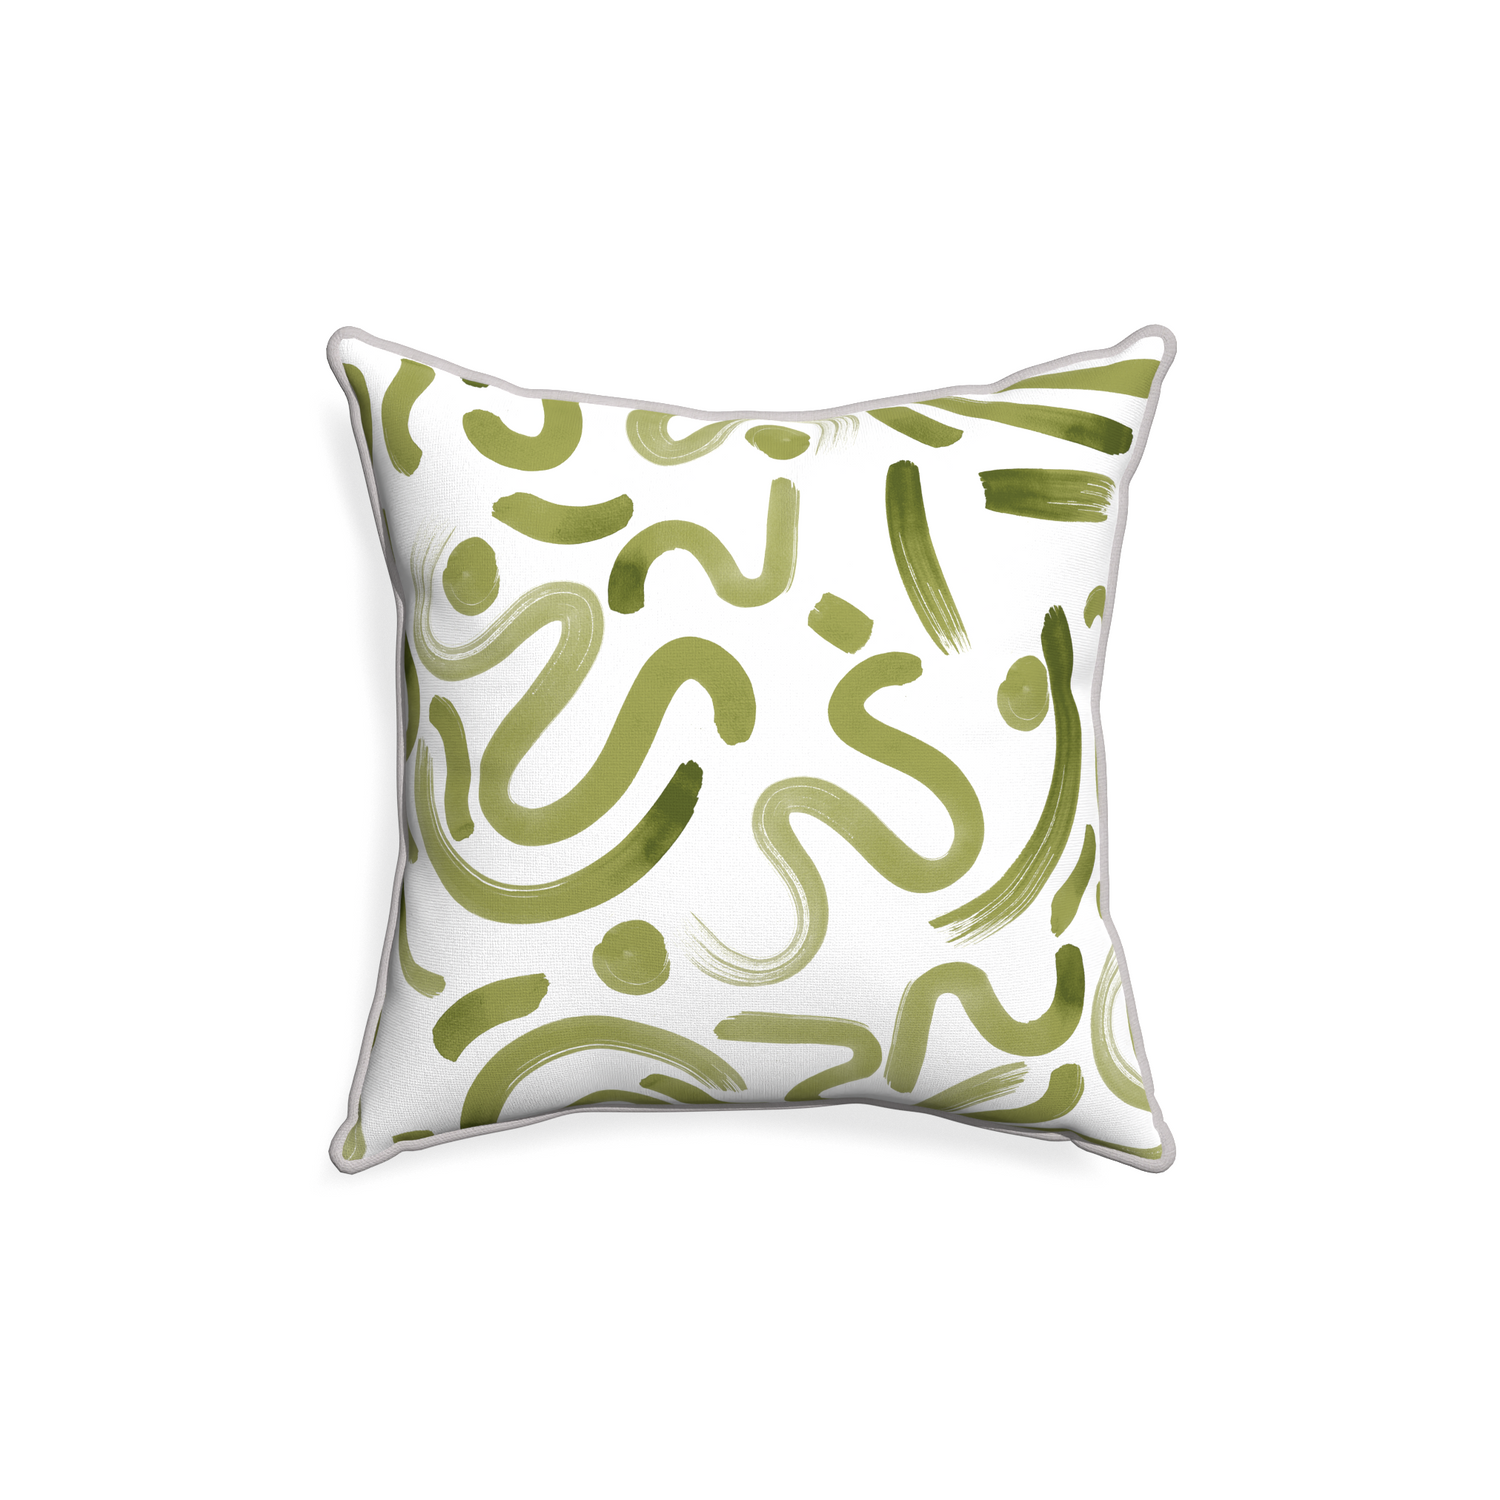 18-square hockney moss custom moss greenpillow with pebble piping on white background